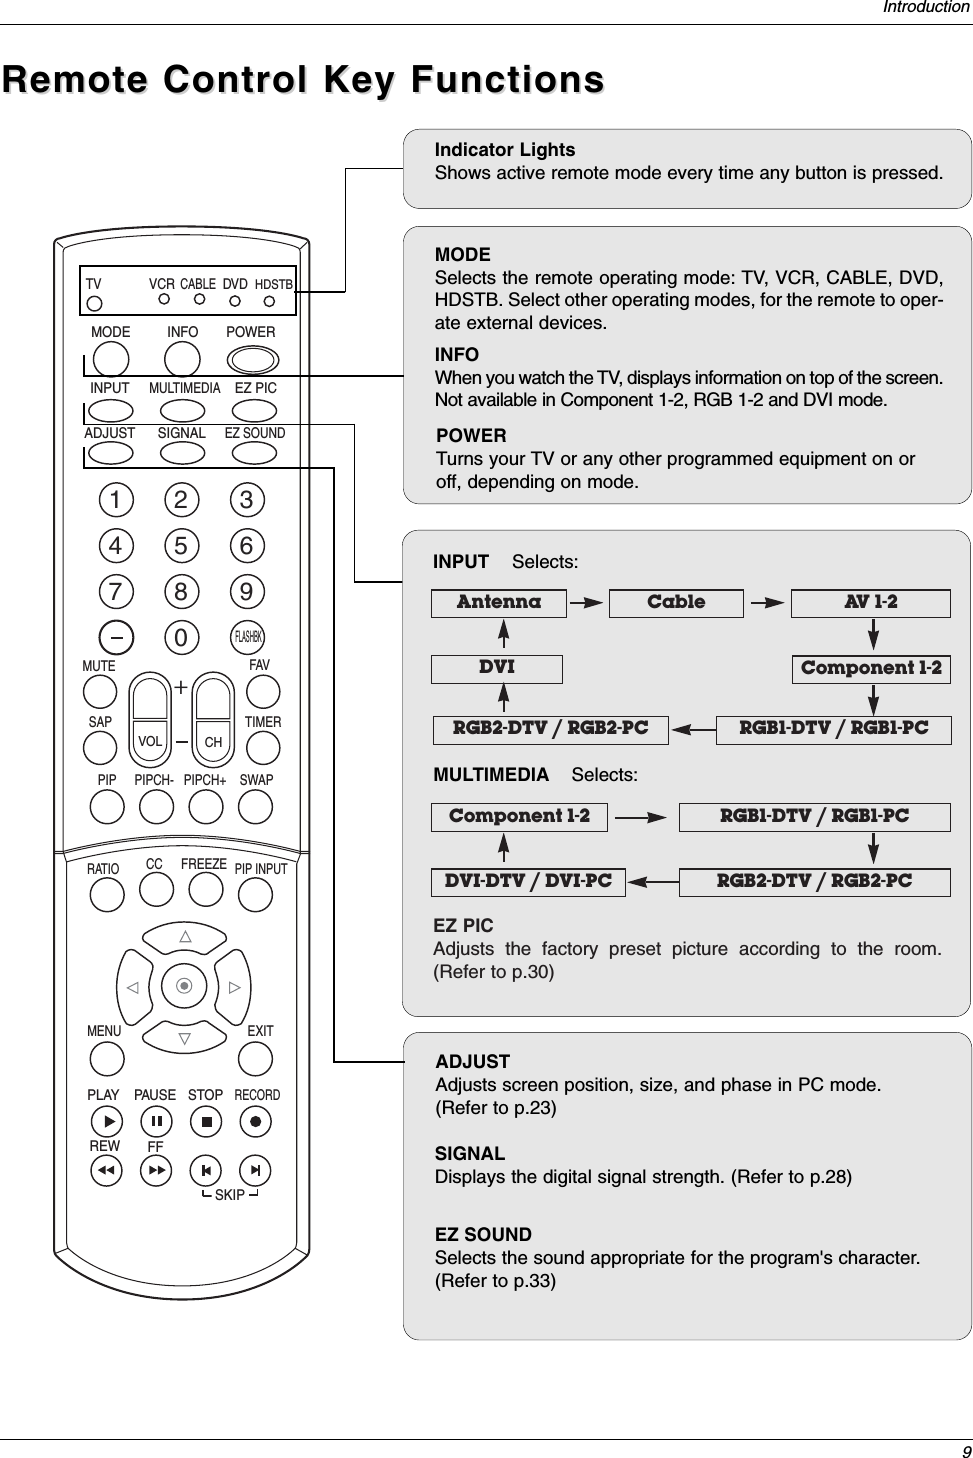 9IntroductionRemote Control Key FunctionsRemote Control Key FunctionsADJUSTAdjusts screen position, size, and phase in PC mode.(Refer to p.23)MODESelects the remote operating mode: TV, VCR, CABLE, DVD,HDSTB. Select other operating modes, for the remote to oper-ate external devices.Indicator LightsShows active remote mode every time any button is pressed.INFOWhen you watch the TV, displays information on top of the screen.Not available in Component 1-2, RGB 1-2 and DVI mode.SIGNALDisplays the digital signal strength. (Refer to p.28)EZ SOUNDSelects the sound appropriate for the program&apos;s character.(Refer to p.33)POWERTurns your TV or any other programmed equipment on oroff, depending on mode.1 2 34 5 67 8 90TVMODE INFO POWER   INPUT EZ PICEZ SOUNDVCRCABLEDVDHDSTBMUTESWAPPIPCH- PIPCH+PIPRATIORECORDSTOPPAUSEREWPLAYFFMENU EXITCC FREEZEPIP INPUTVOL CHFAVSAP TIMERSIGNALADJUSTMULTIMEDIASKIPFLASHBK+INPUT    Selects:MULTIMEDIA Selects:Antenna Cable AV  1 - 2Component 1-2RGB1-DTV / RGB1-PCRGB2-DTV / RGB2-PCDVIComponent 1-2 RGB1-DTV / RGB1-PCDVI-DTV / DVI-PC RGB2-DTV / RGB2-PCEZ PICAdjusts the factory preset picture according to the room.(Refer to p.30)